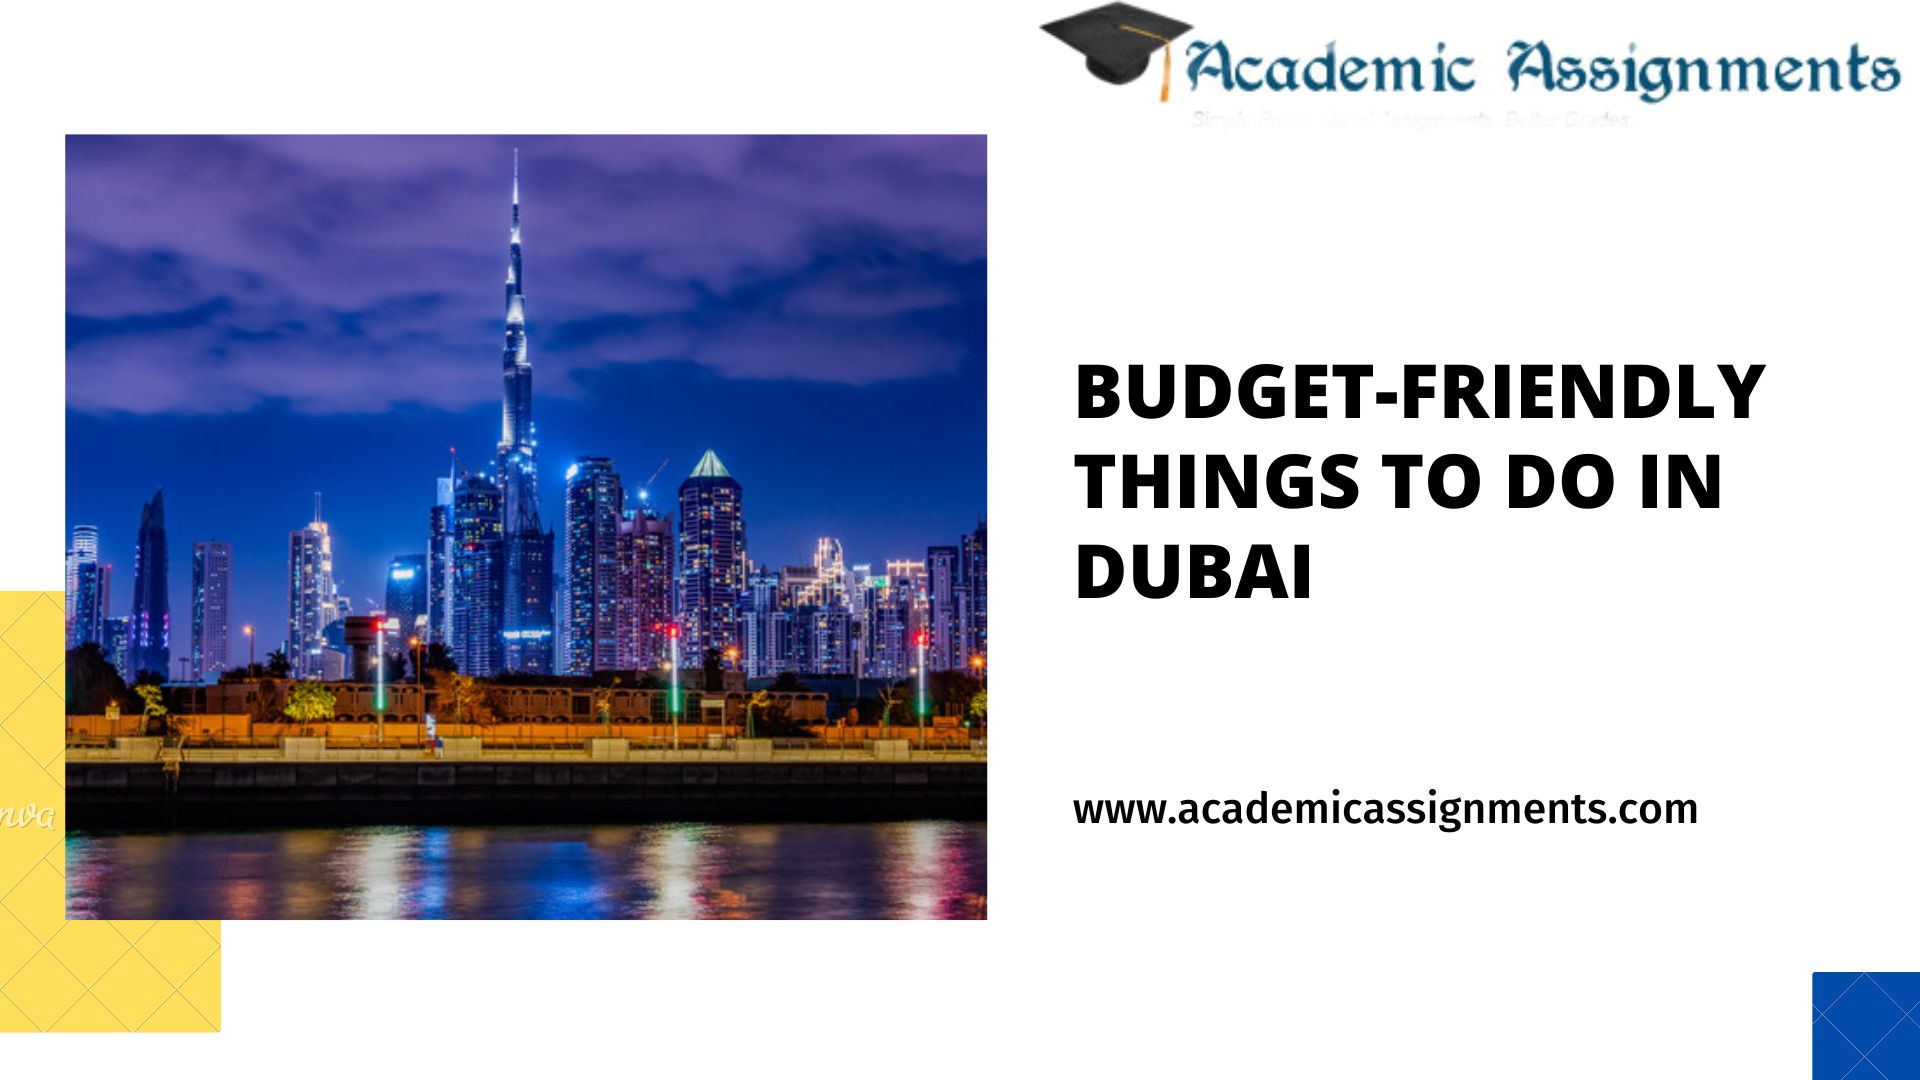 Budget-friendly things to do in Dubai